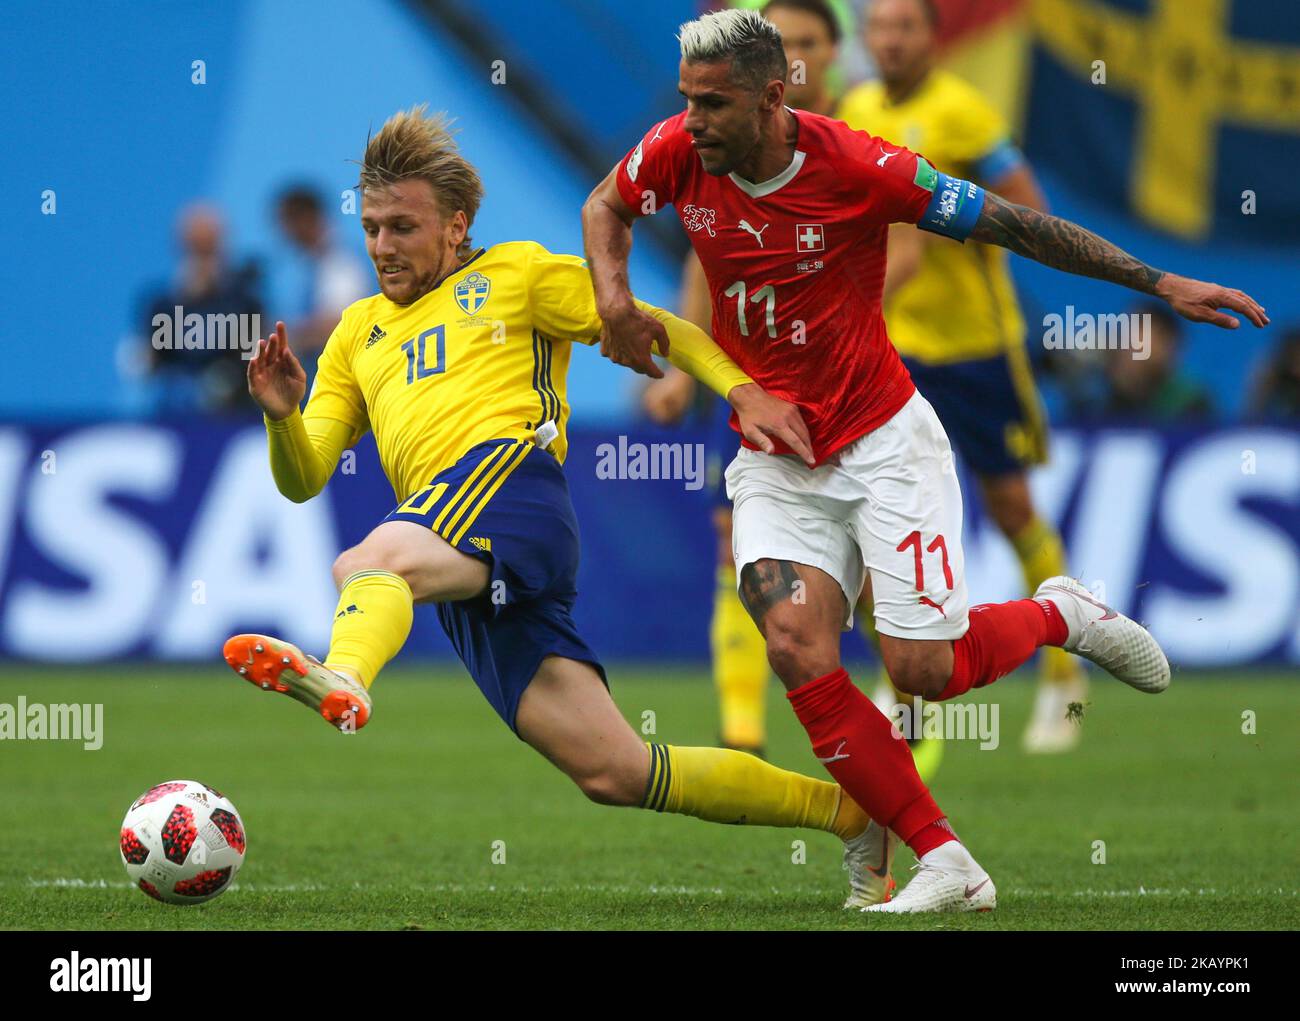 Valon Behrami (R) of the Switzerland national football team and Emil Forsberg of the Sweden national football team vie for the ball during the 2018 FIFA World Cup match, Round of 16 between Sweden and Switzerland at Saint Petersburg Stadium on July 03, 2018 in St. Petersburg, Russia. (Photo by Igor Russak/NurPhoto) Stock Photo